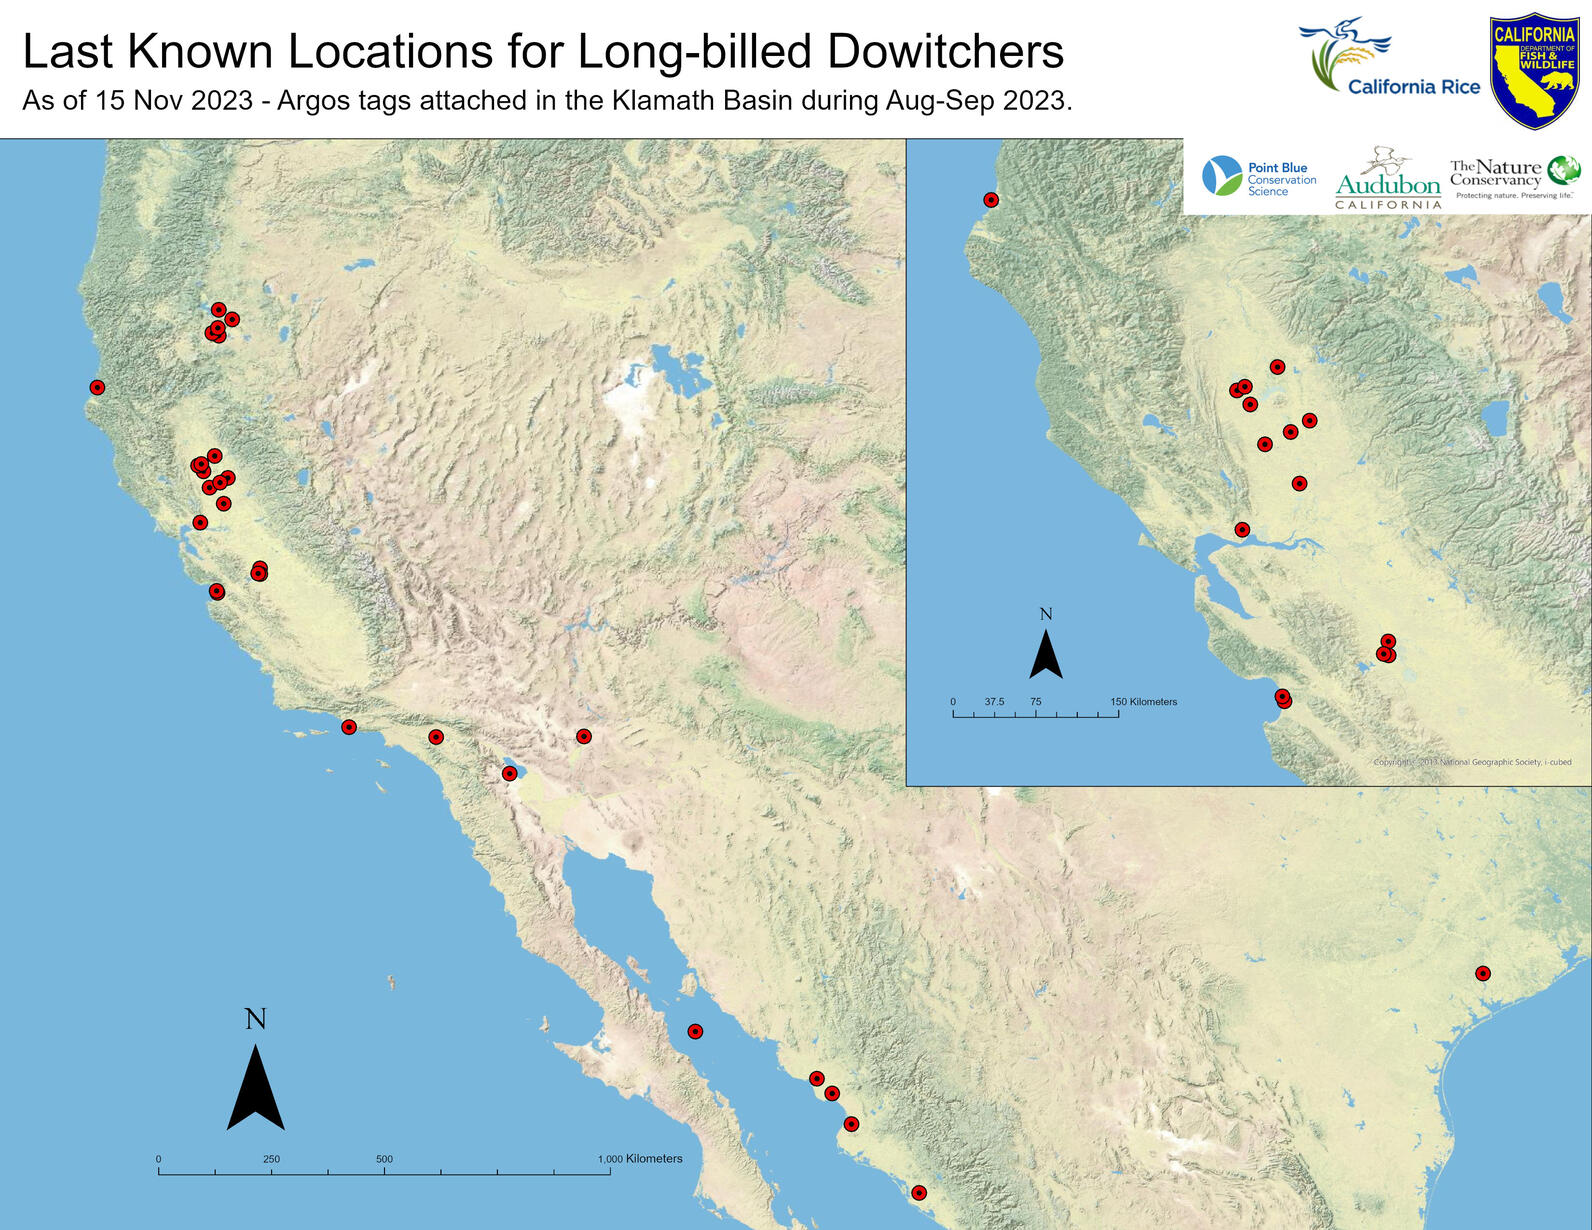 Long-billed Dowitcher - Klamath Connectivity provided by Blake Barbaree, Point Blue Conservation Science 